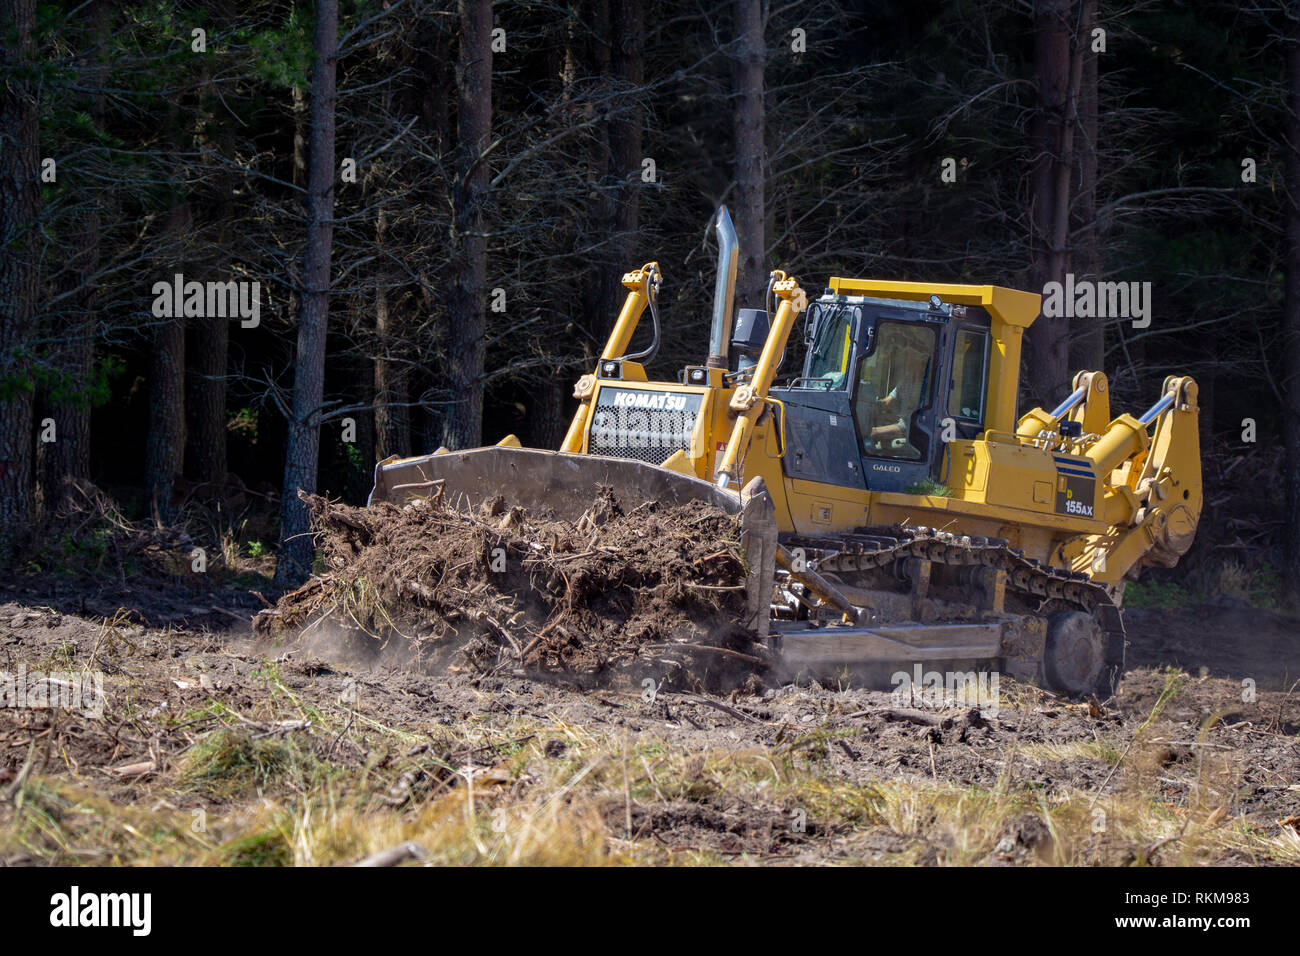 A large yellow bulldozer pushes stumps and tree roots into piles to prepare a forestry site for replanting in Canterbury, New Zealand Stock Photo